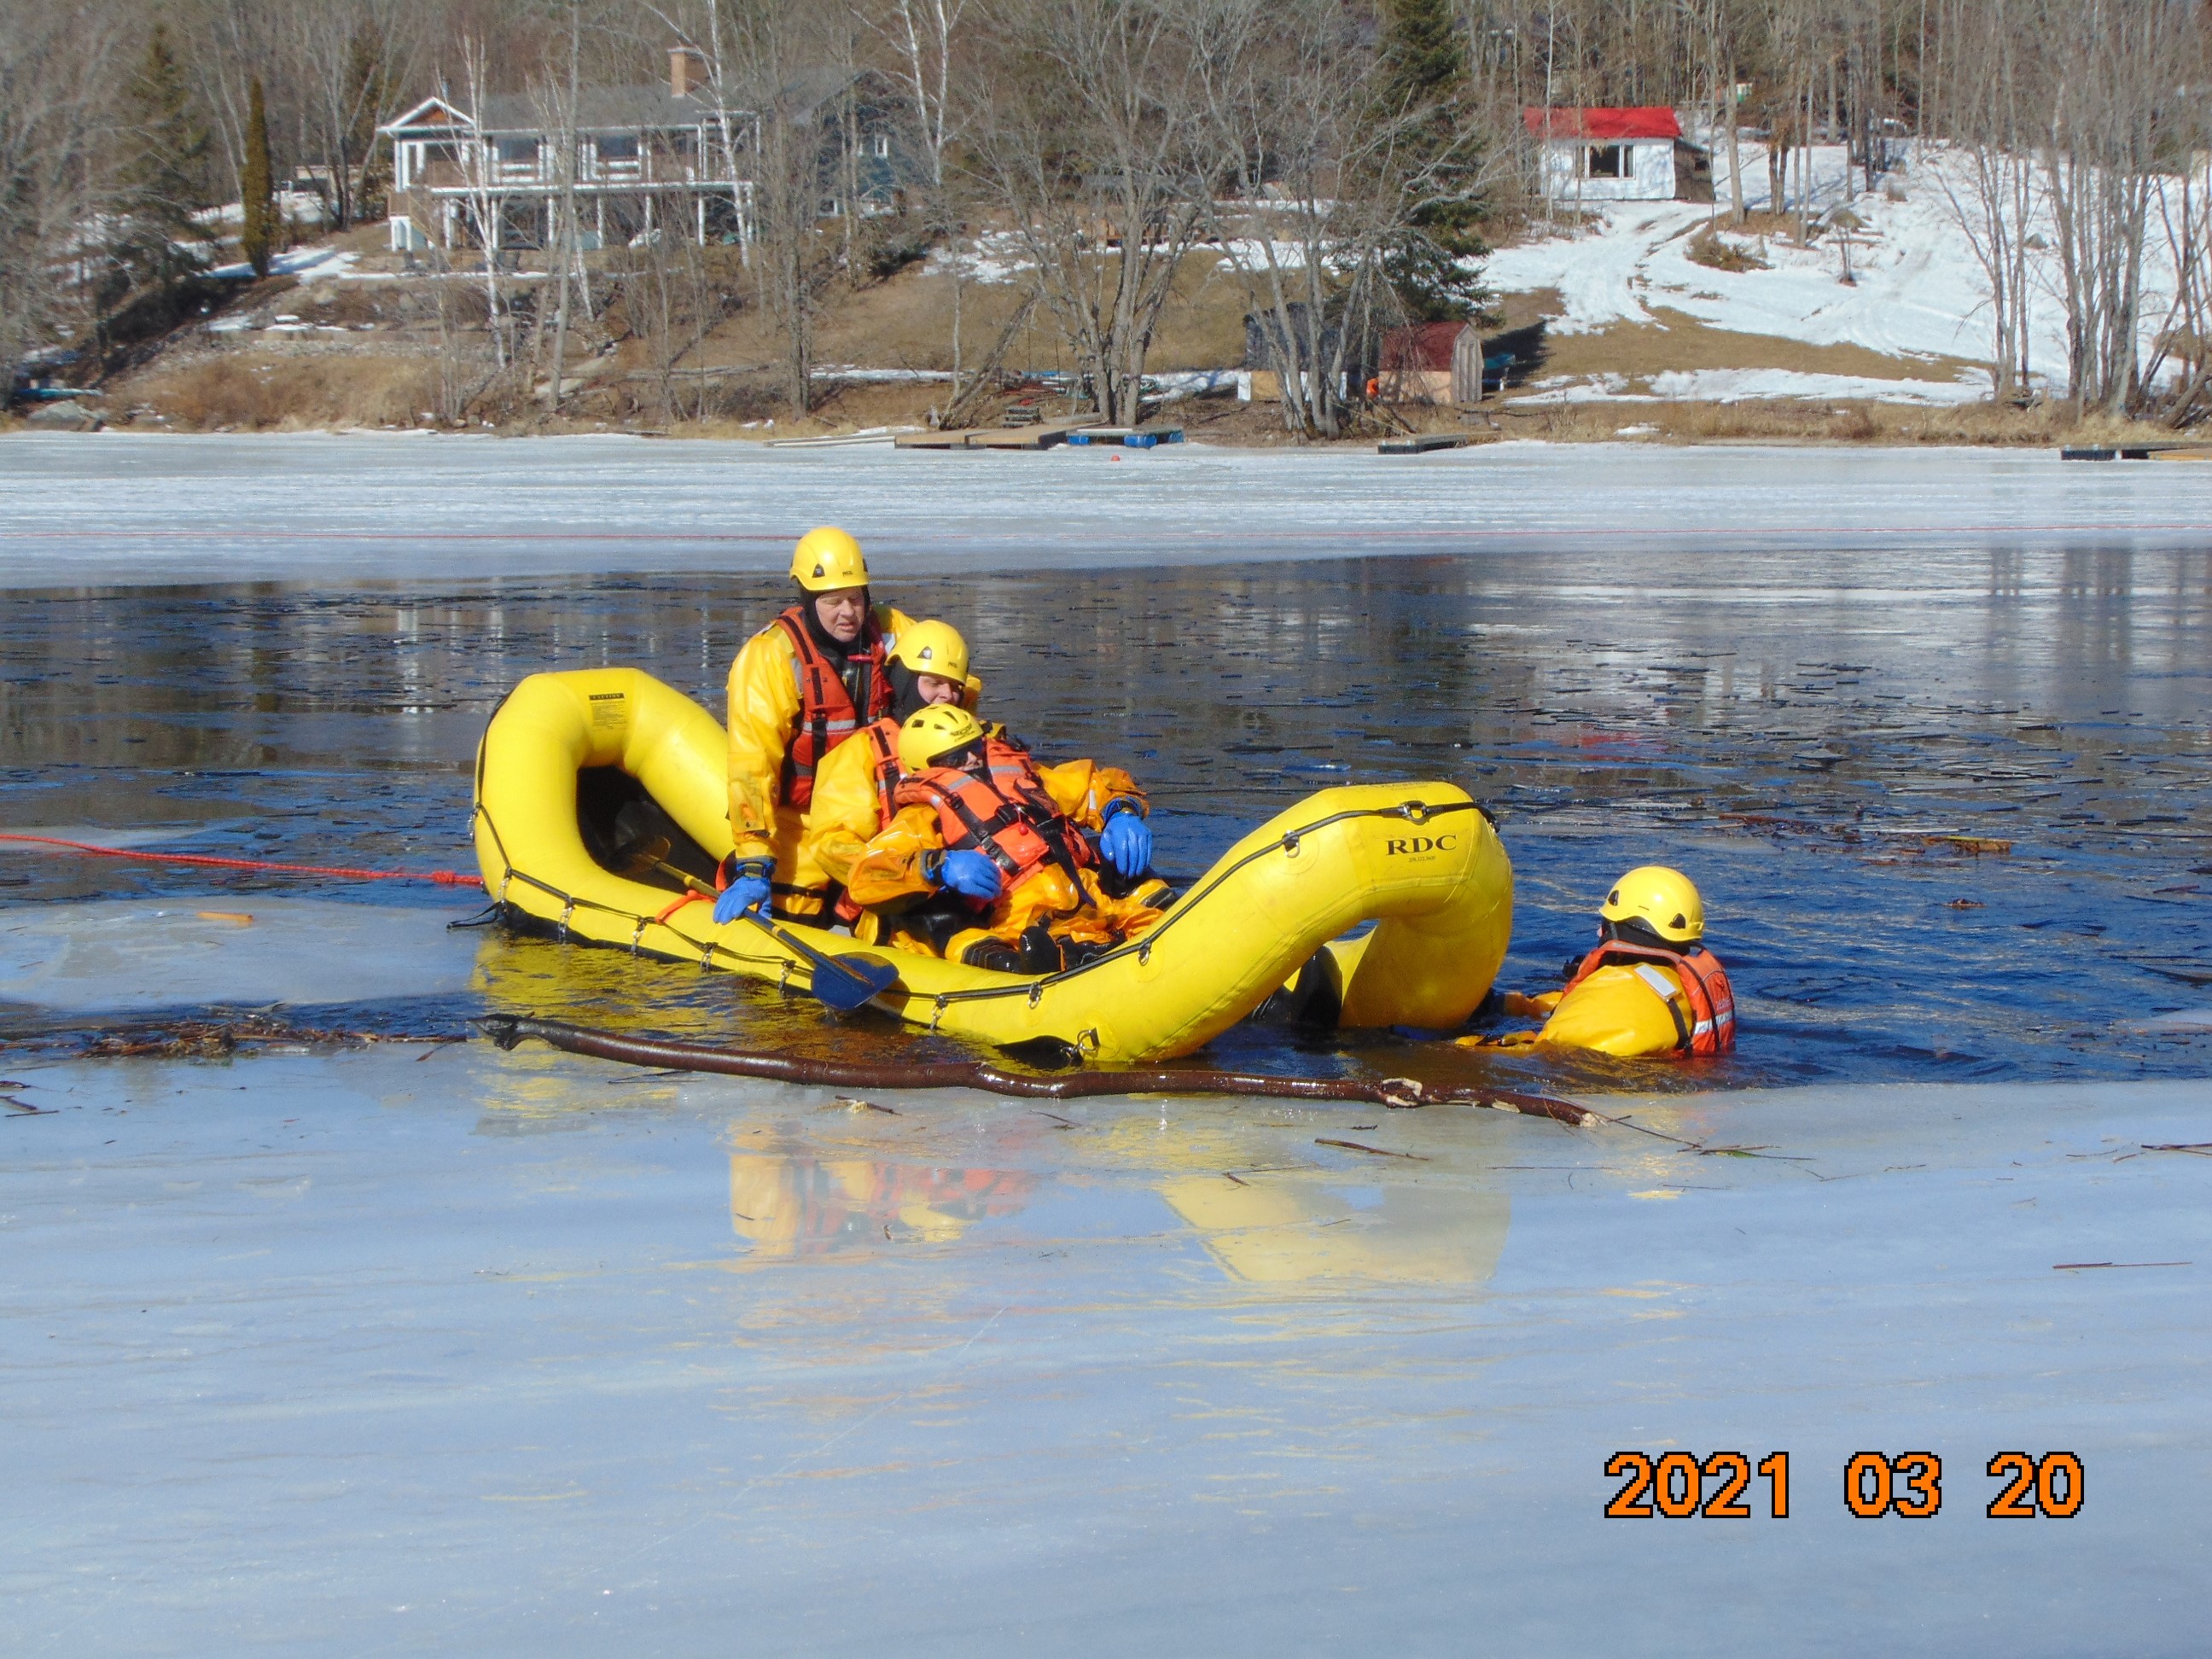 Members of the Dysart Fire Department in a Raft Practicing Ice Training